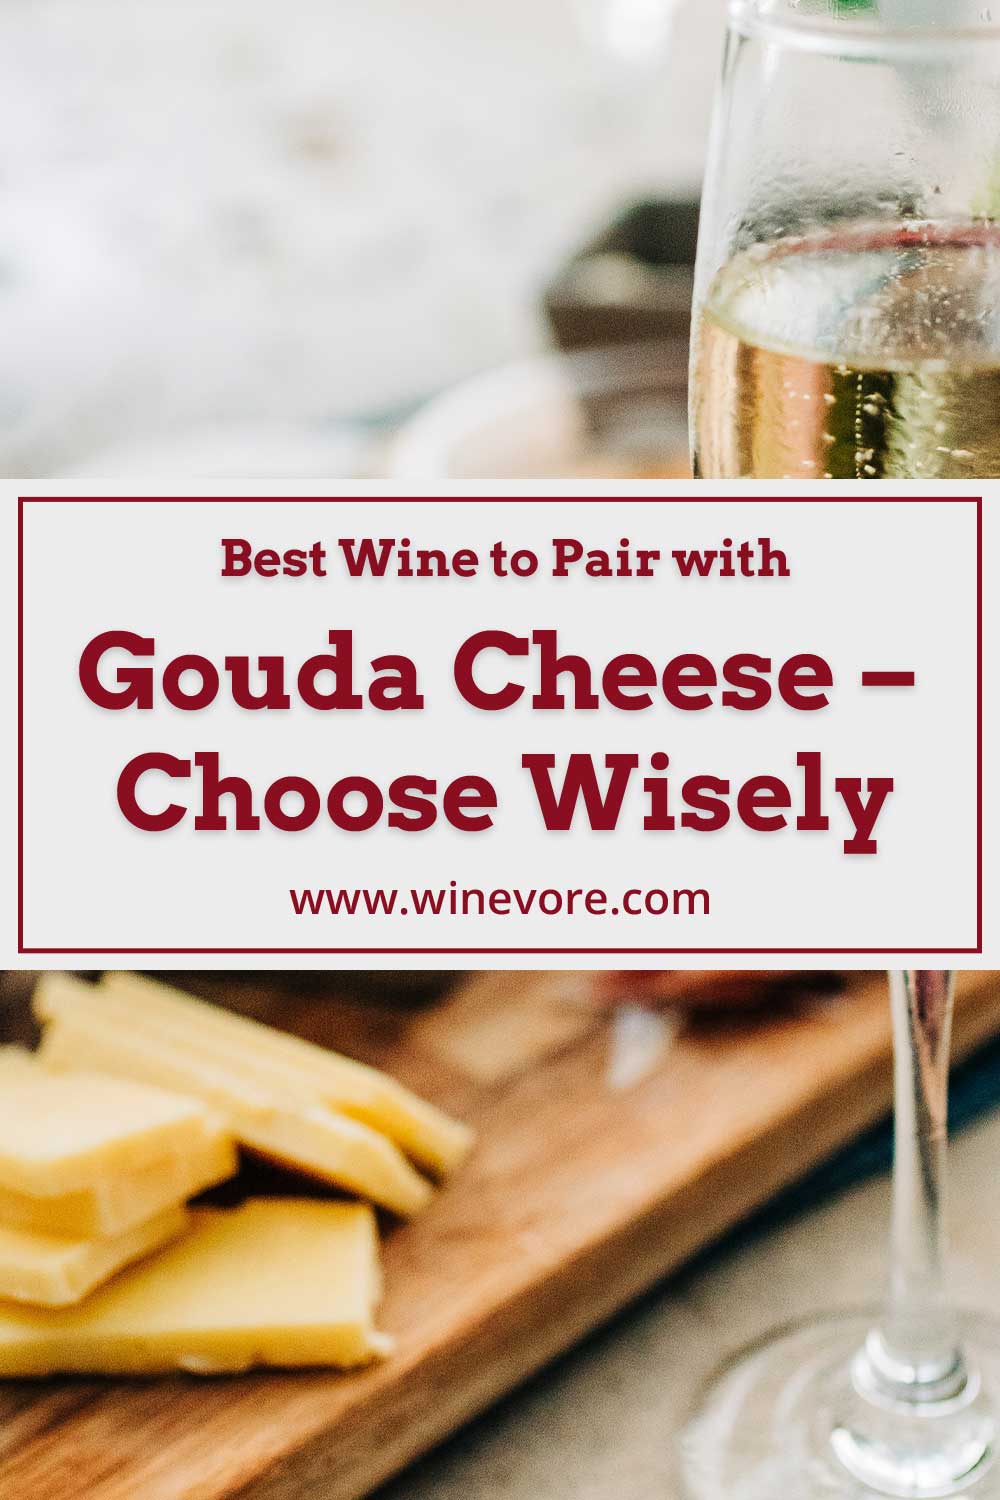 Wine glass near some slices of cheese - Best Wine to Pair with Gouda Cheese.